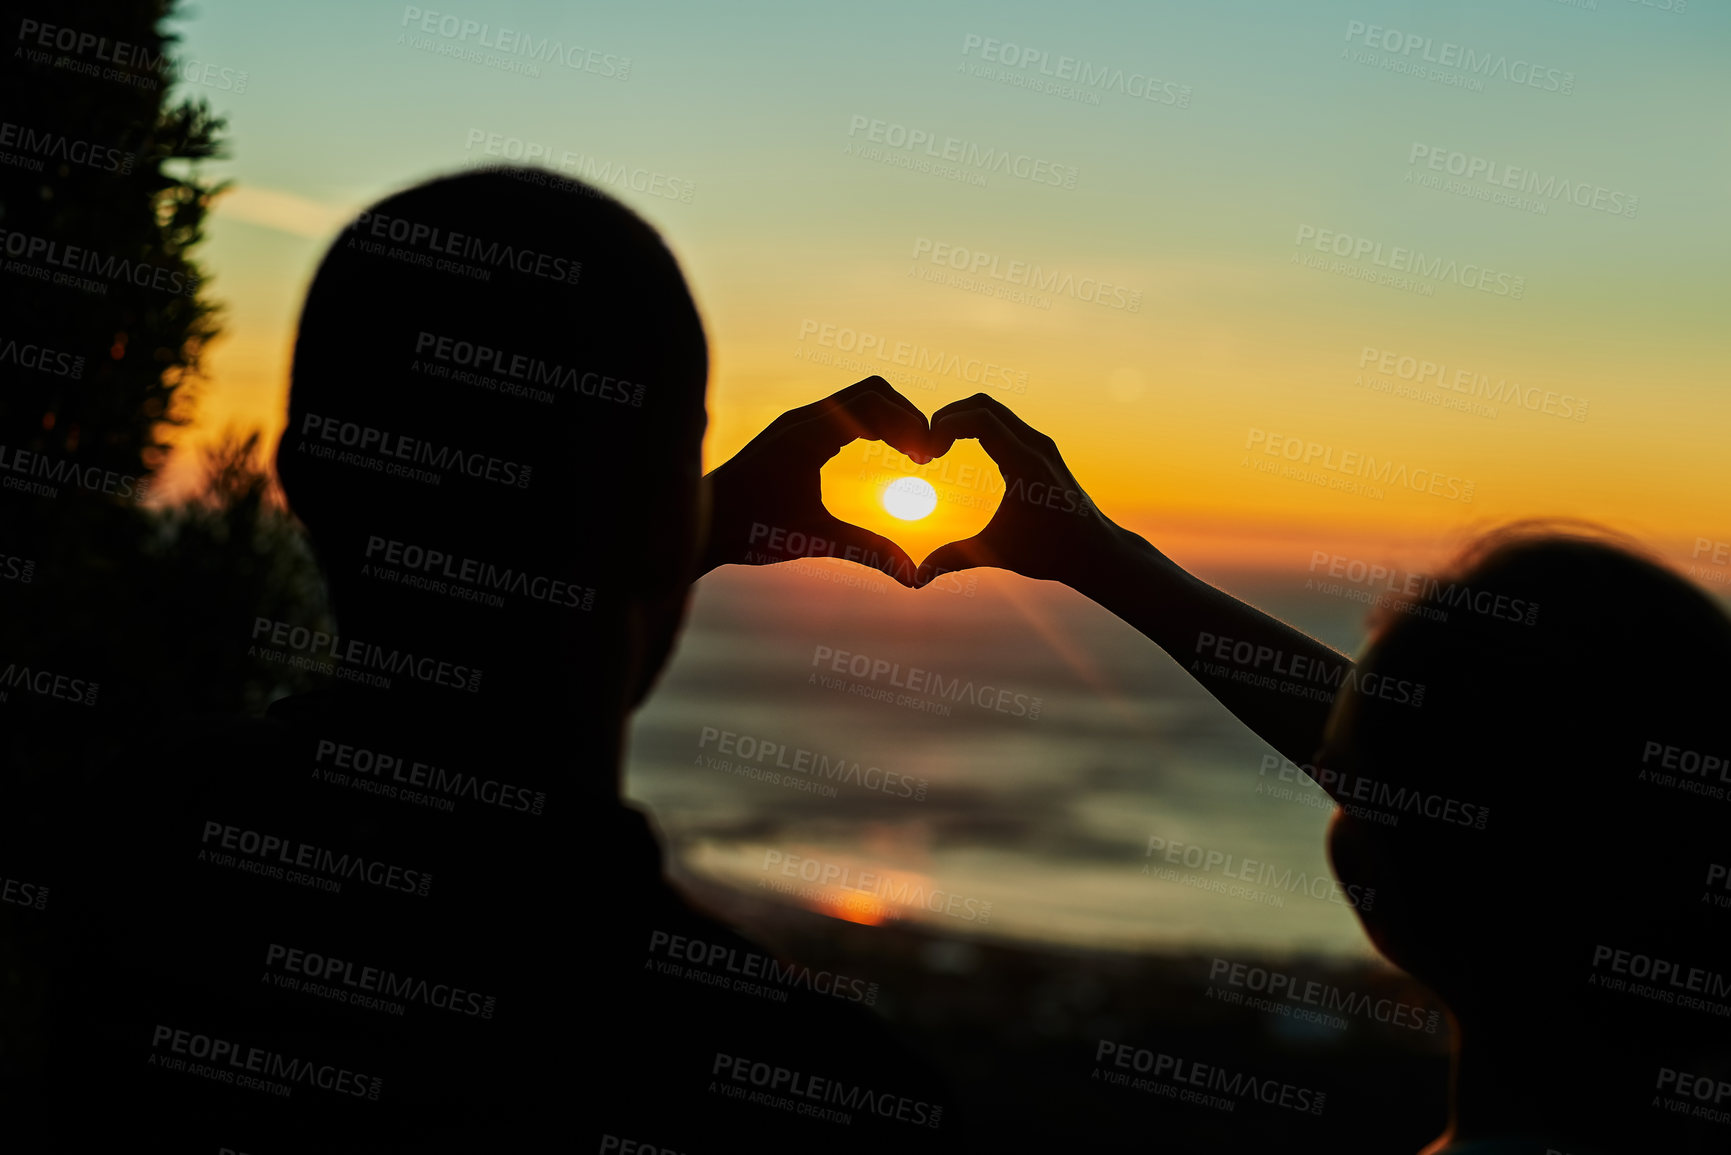 Buy stock photo Rearview shot of two young people making heart shapes with their hands